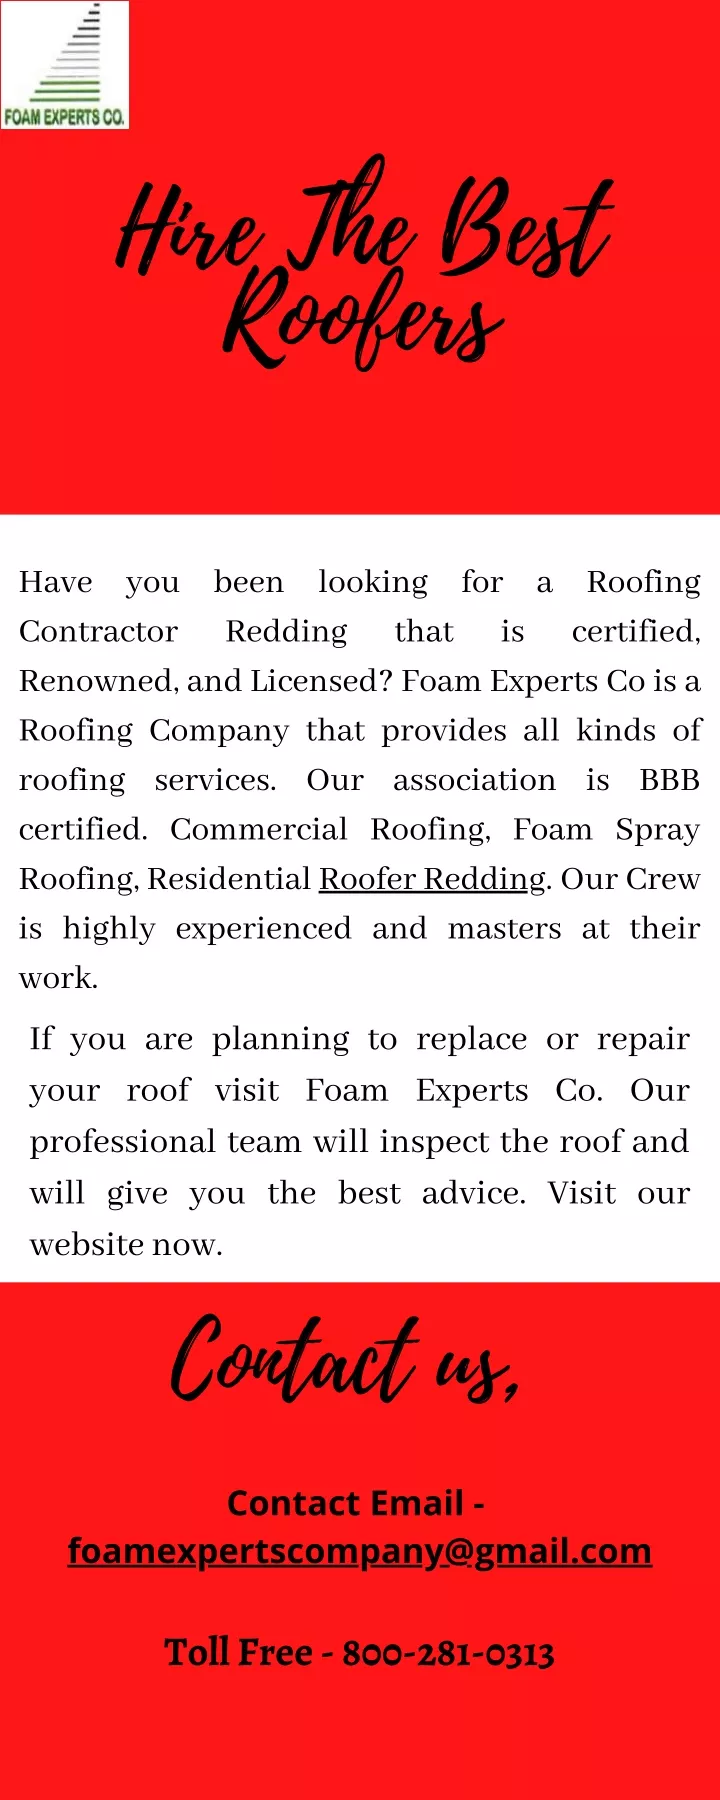 hire the best roofers